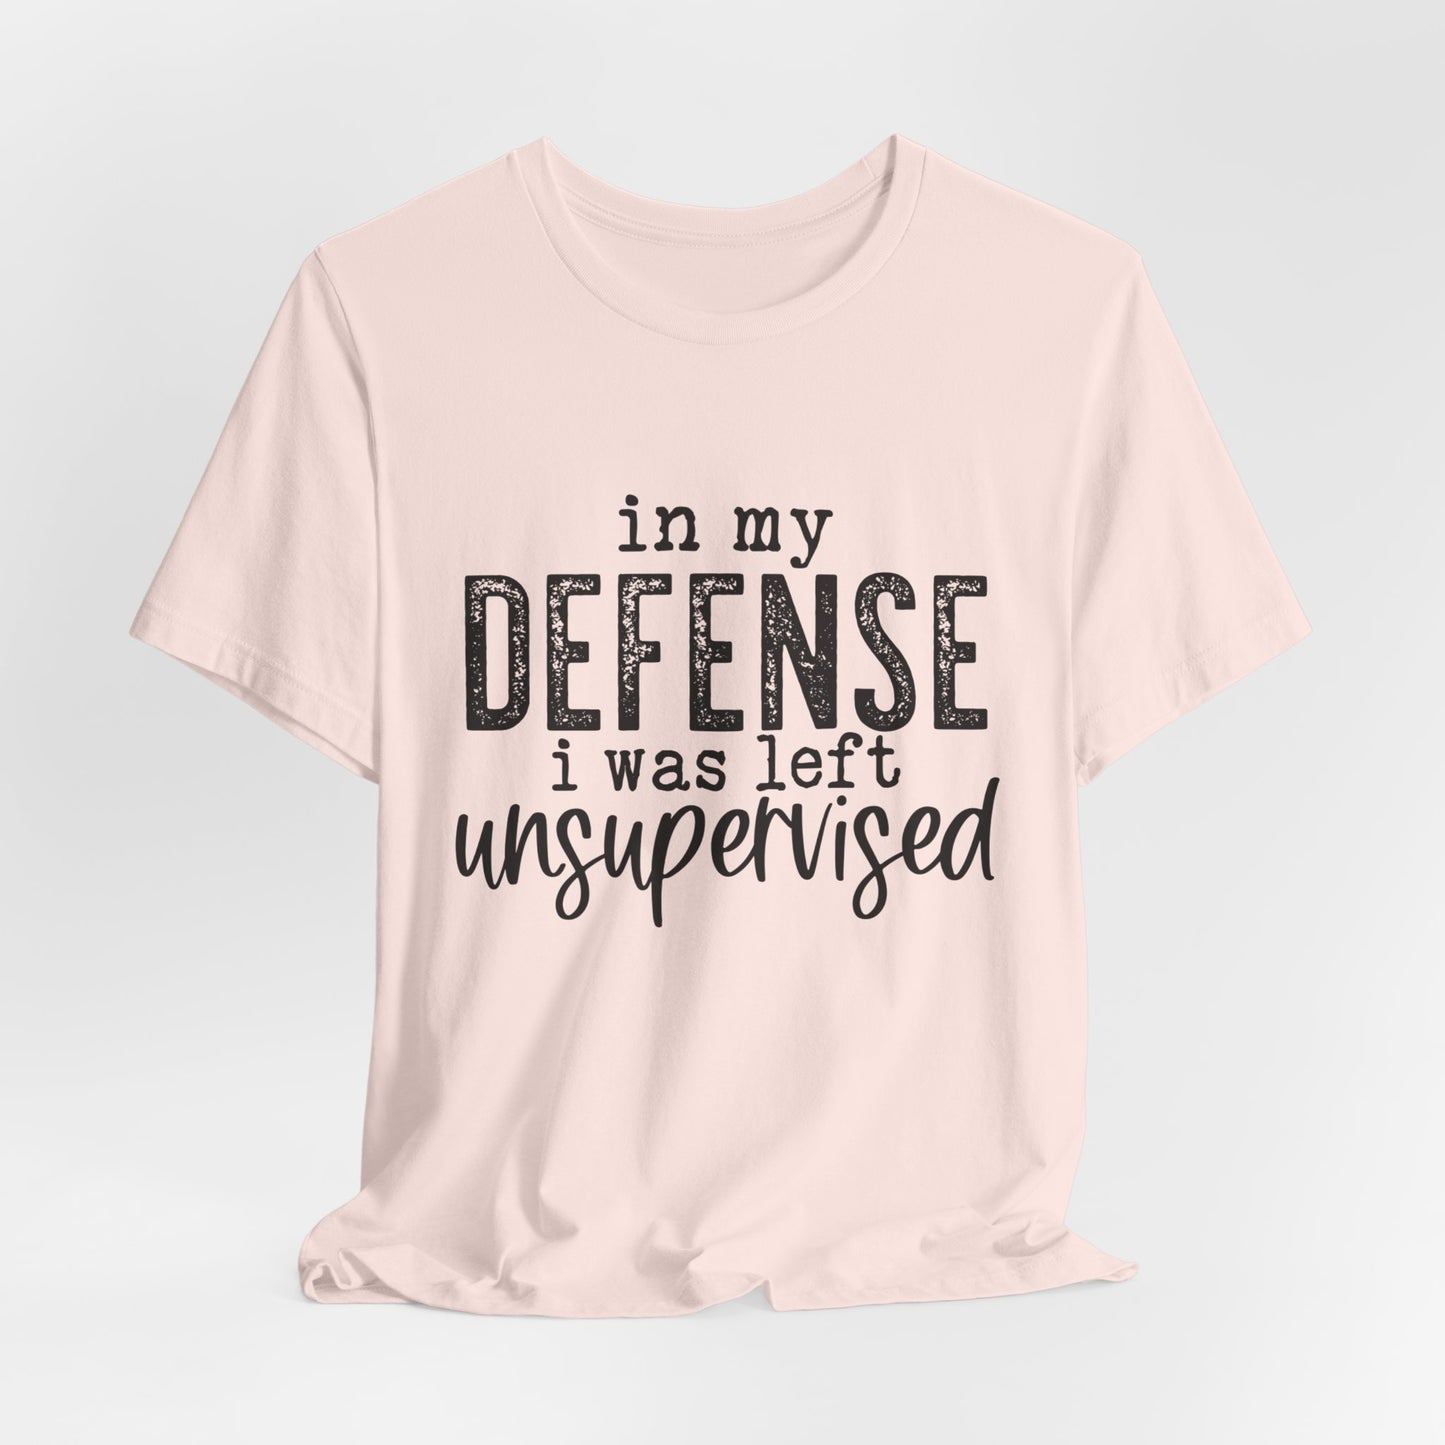 In My Defense, I Was Left Unsupervised Women's Funny Short Sleeve Tshirt